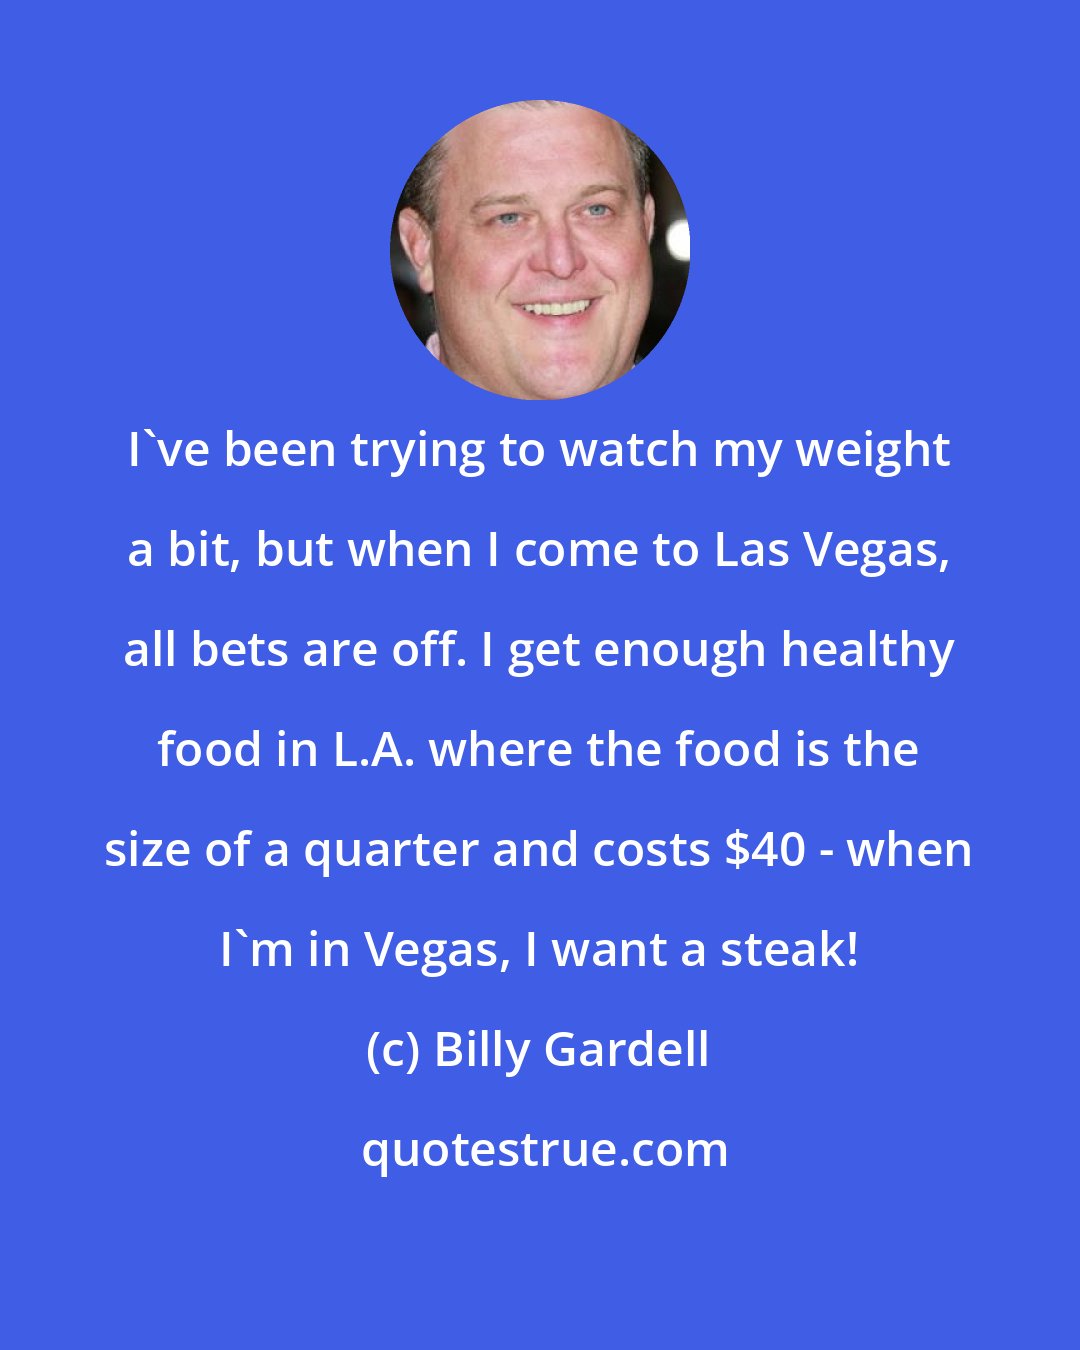 Billy Gardell: I've been trying to watch my weight a bit, but when I come to Las Vegas, all bets are off. I get enough healthy food in L.A. where the food is the size of a quarter and costs $40 - when I'm in Vegas, I want a steak!